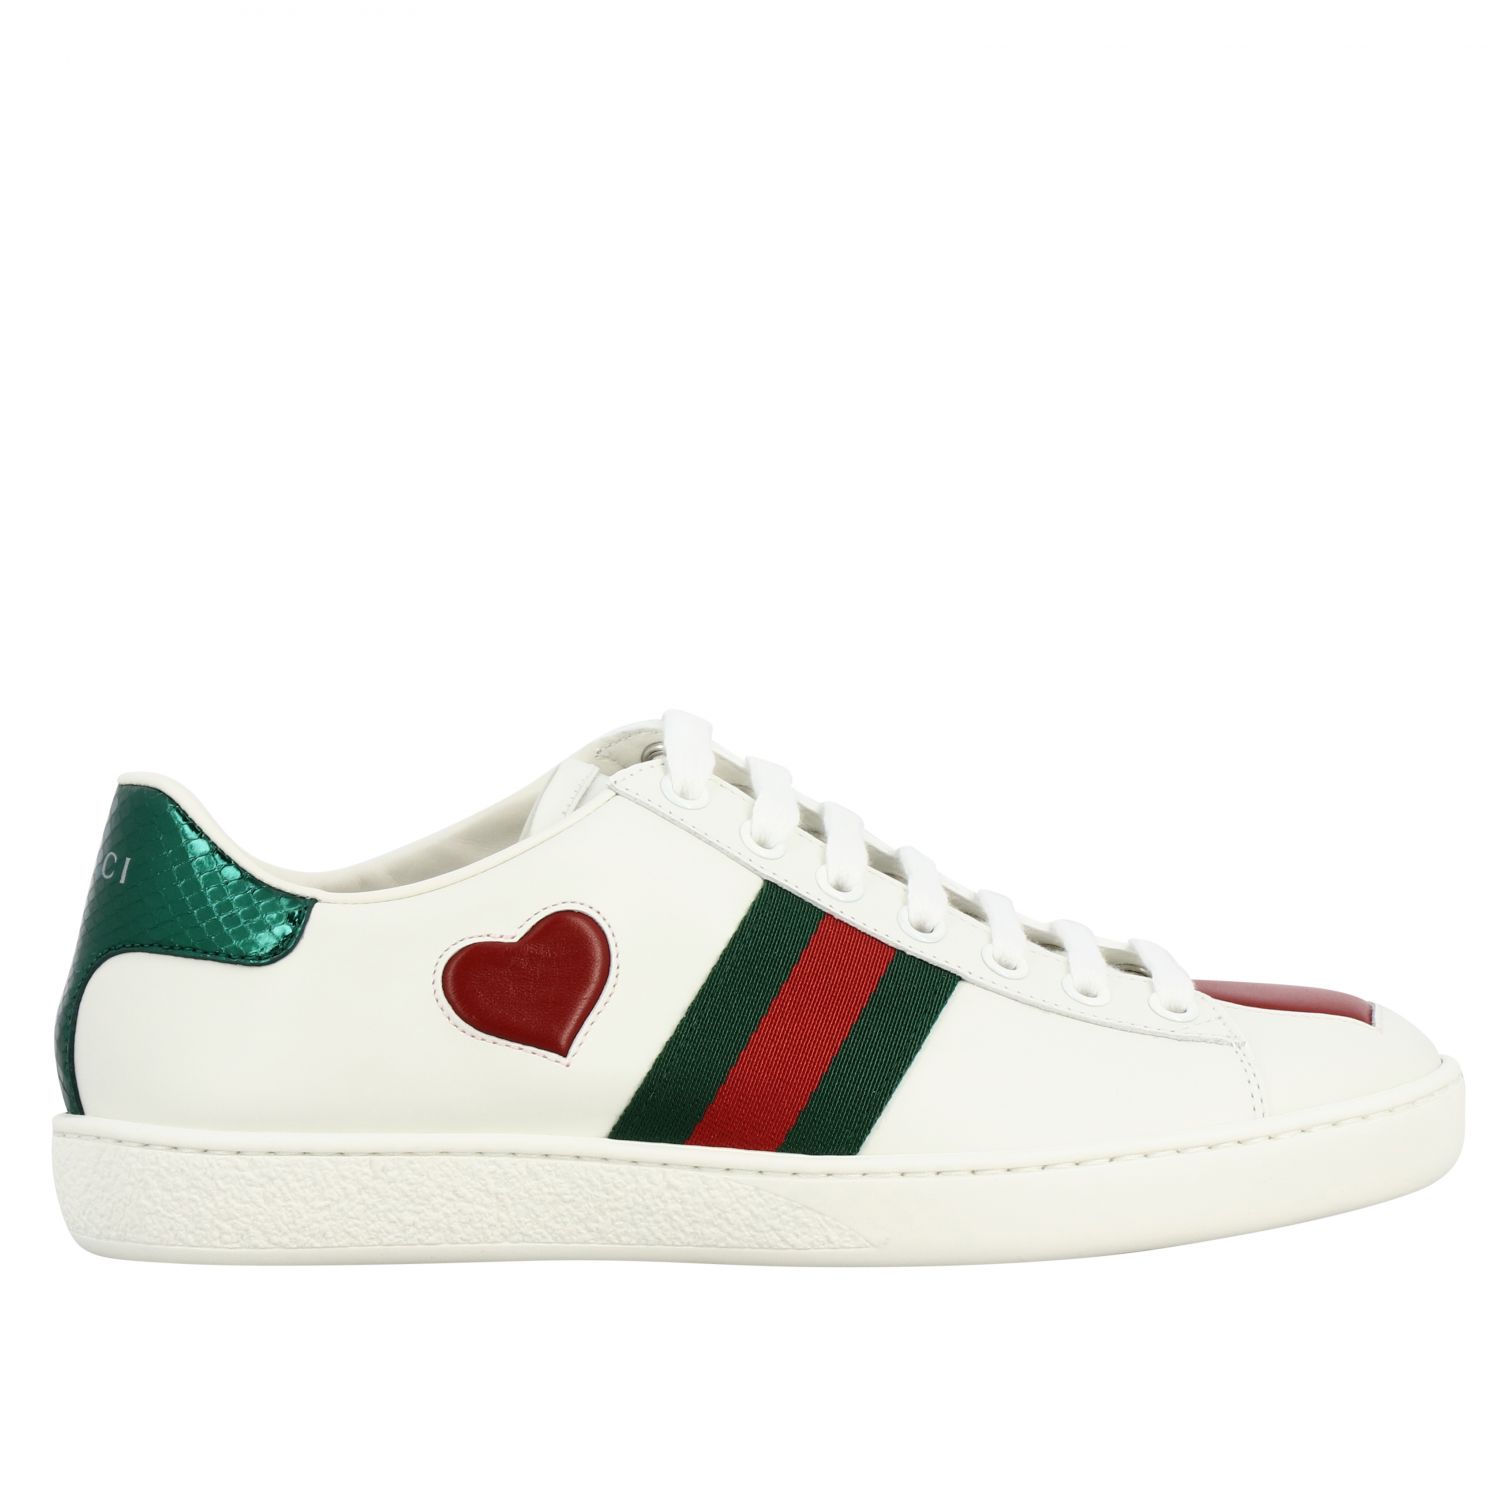 GUCCI: New Ace sneakers in leather with heart-shaped patch | Sneakers Gucci Women White Sneakers Gucci 435638 GIGLIO.COM